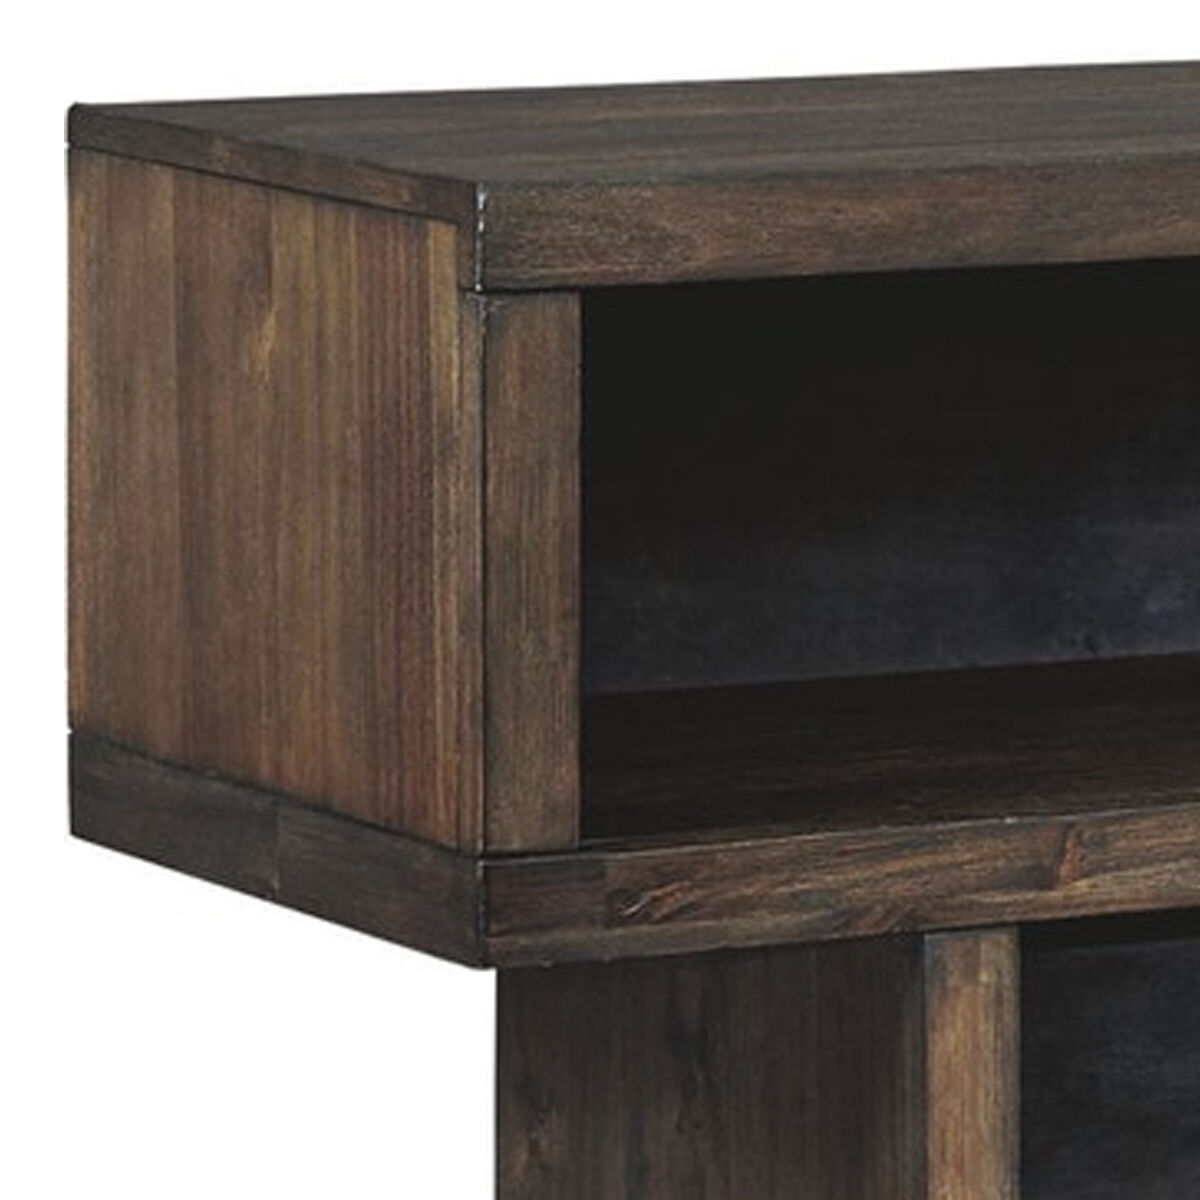 4 Open Shelf Storage Asymmetrical Server with Round Tapered Legs, Brown